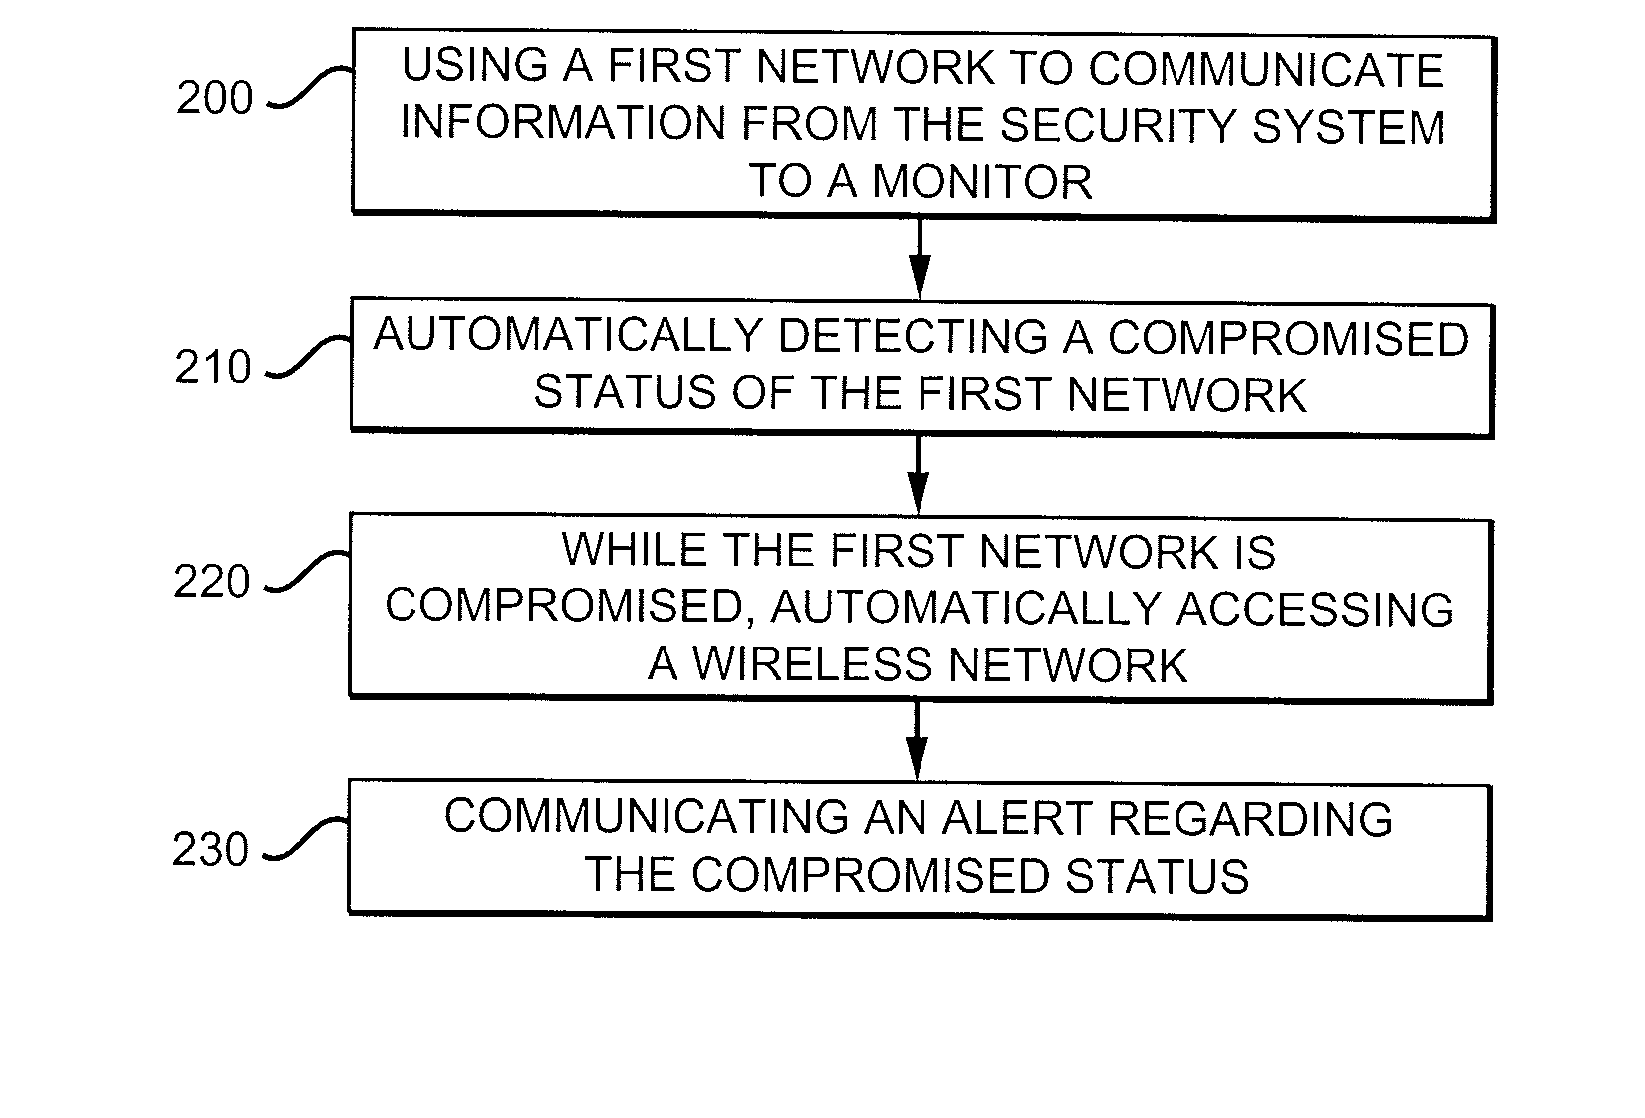 Sharing of a Neighboring Wireless Network